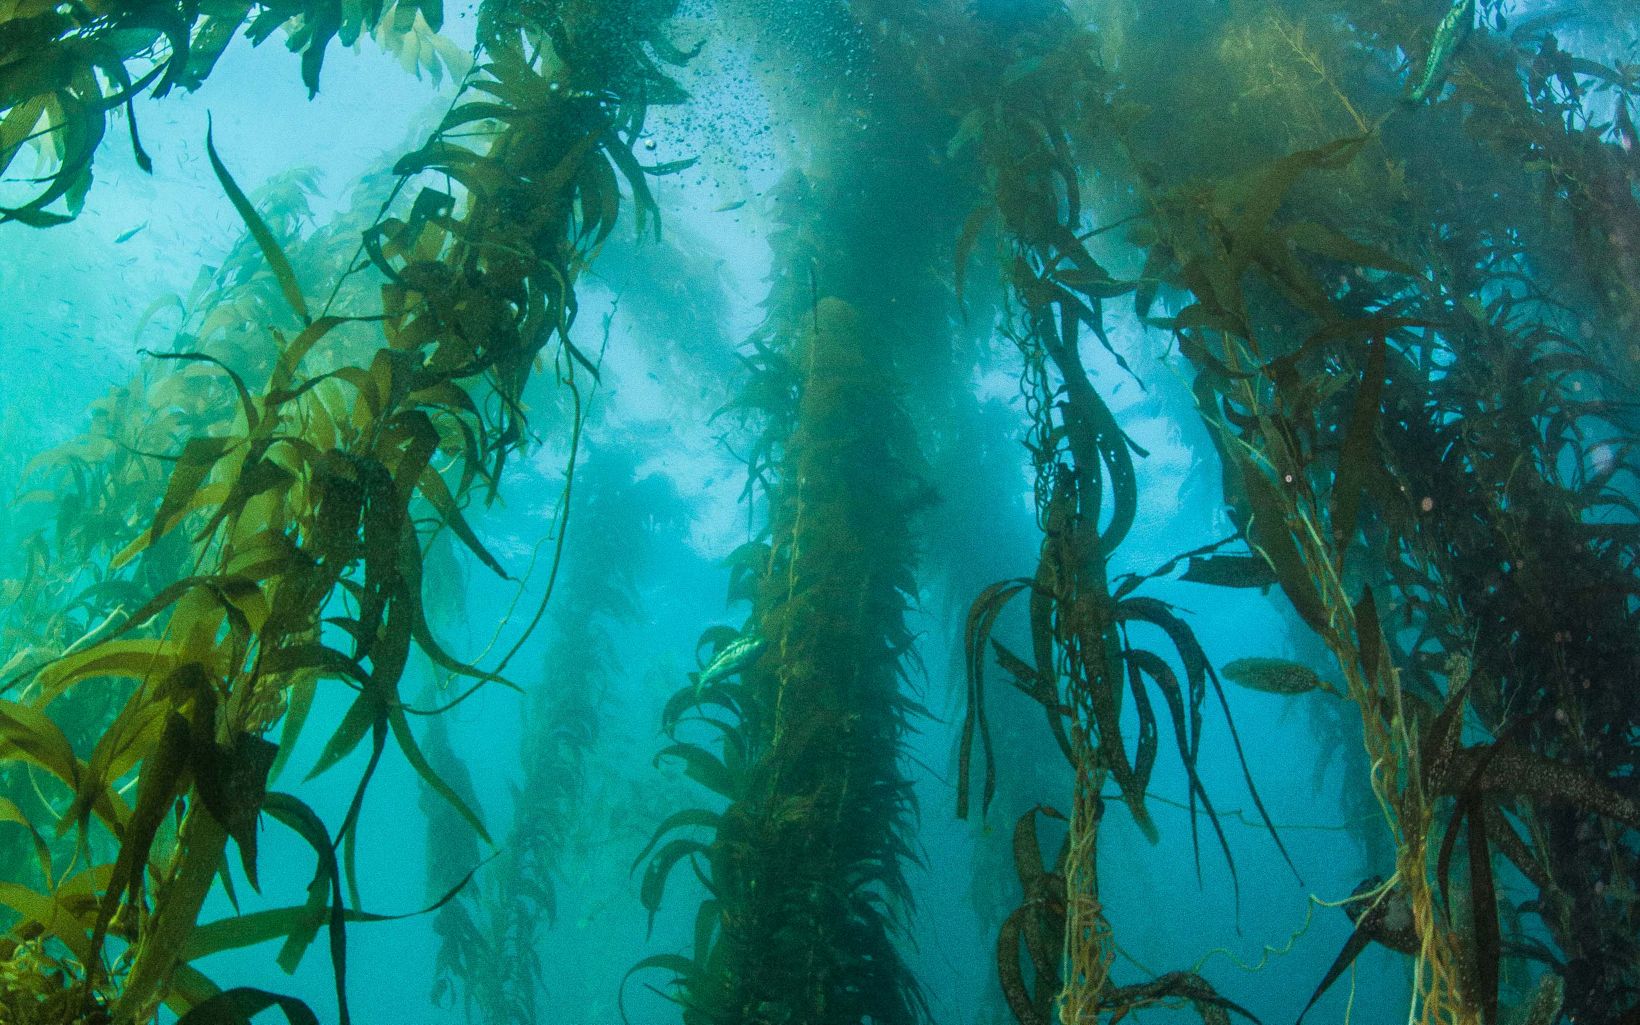 Underwater photo of tall kelp plants extending towards the water's surface.